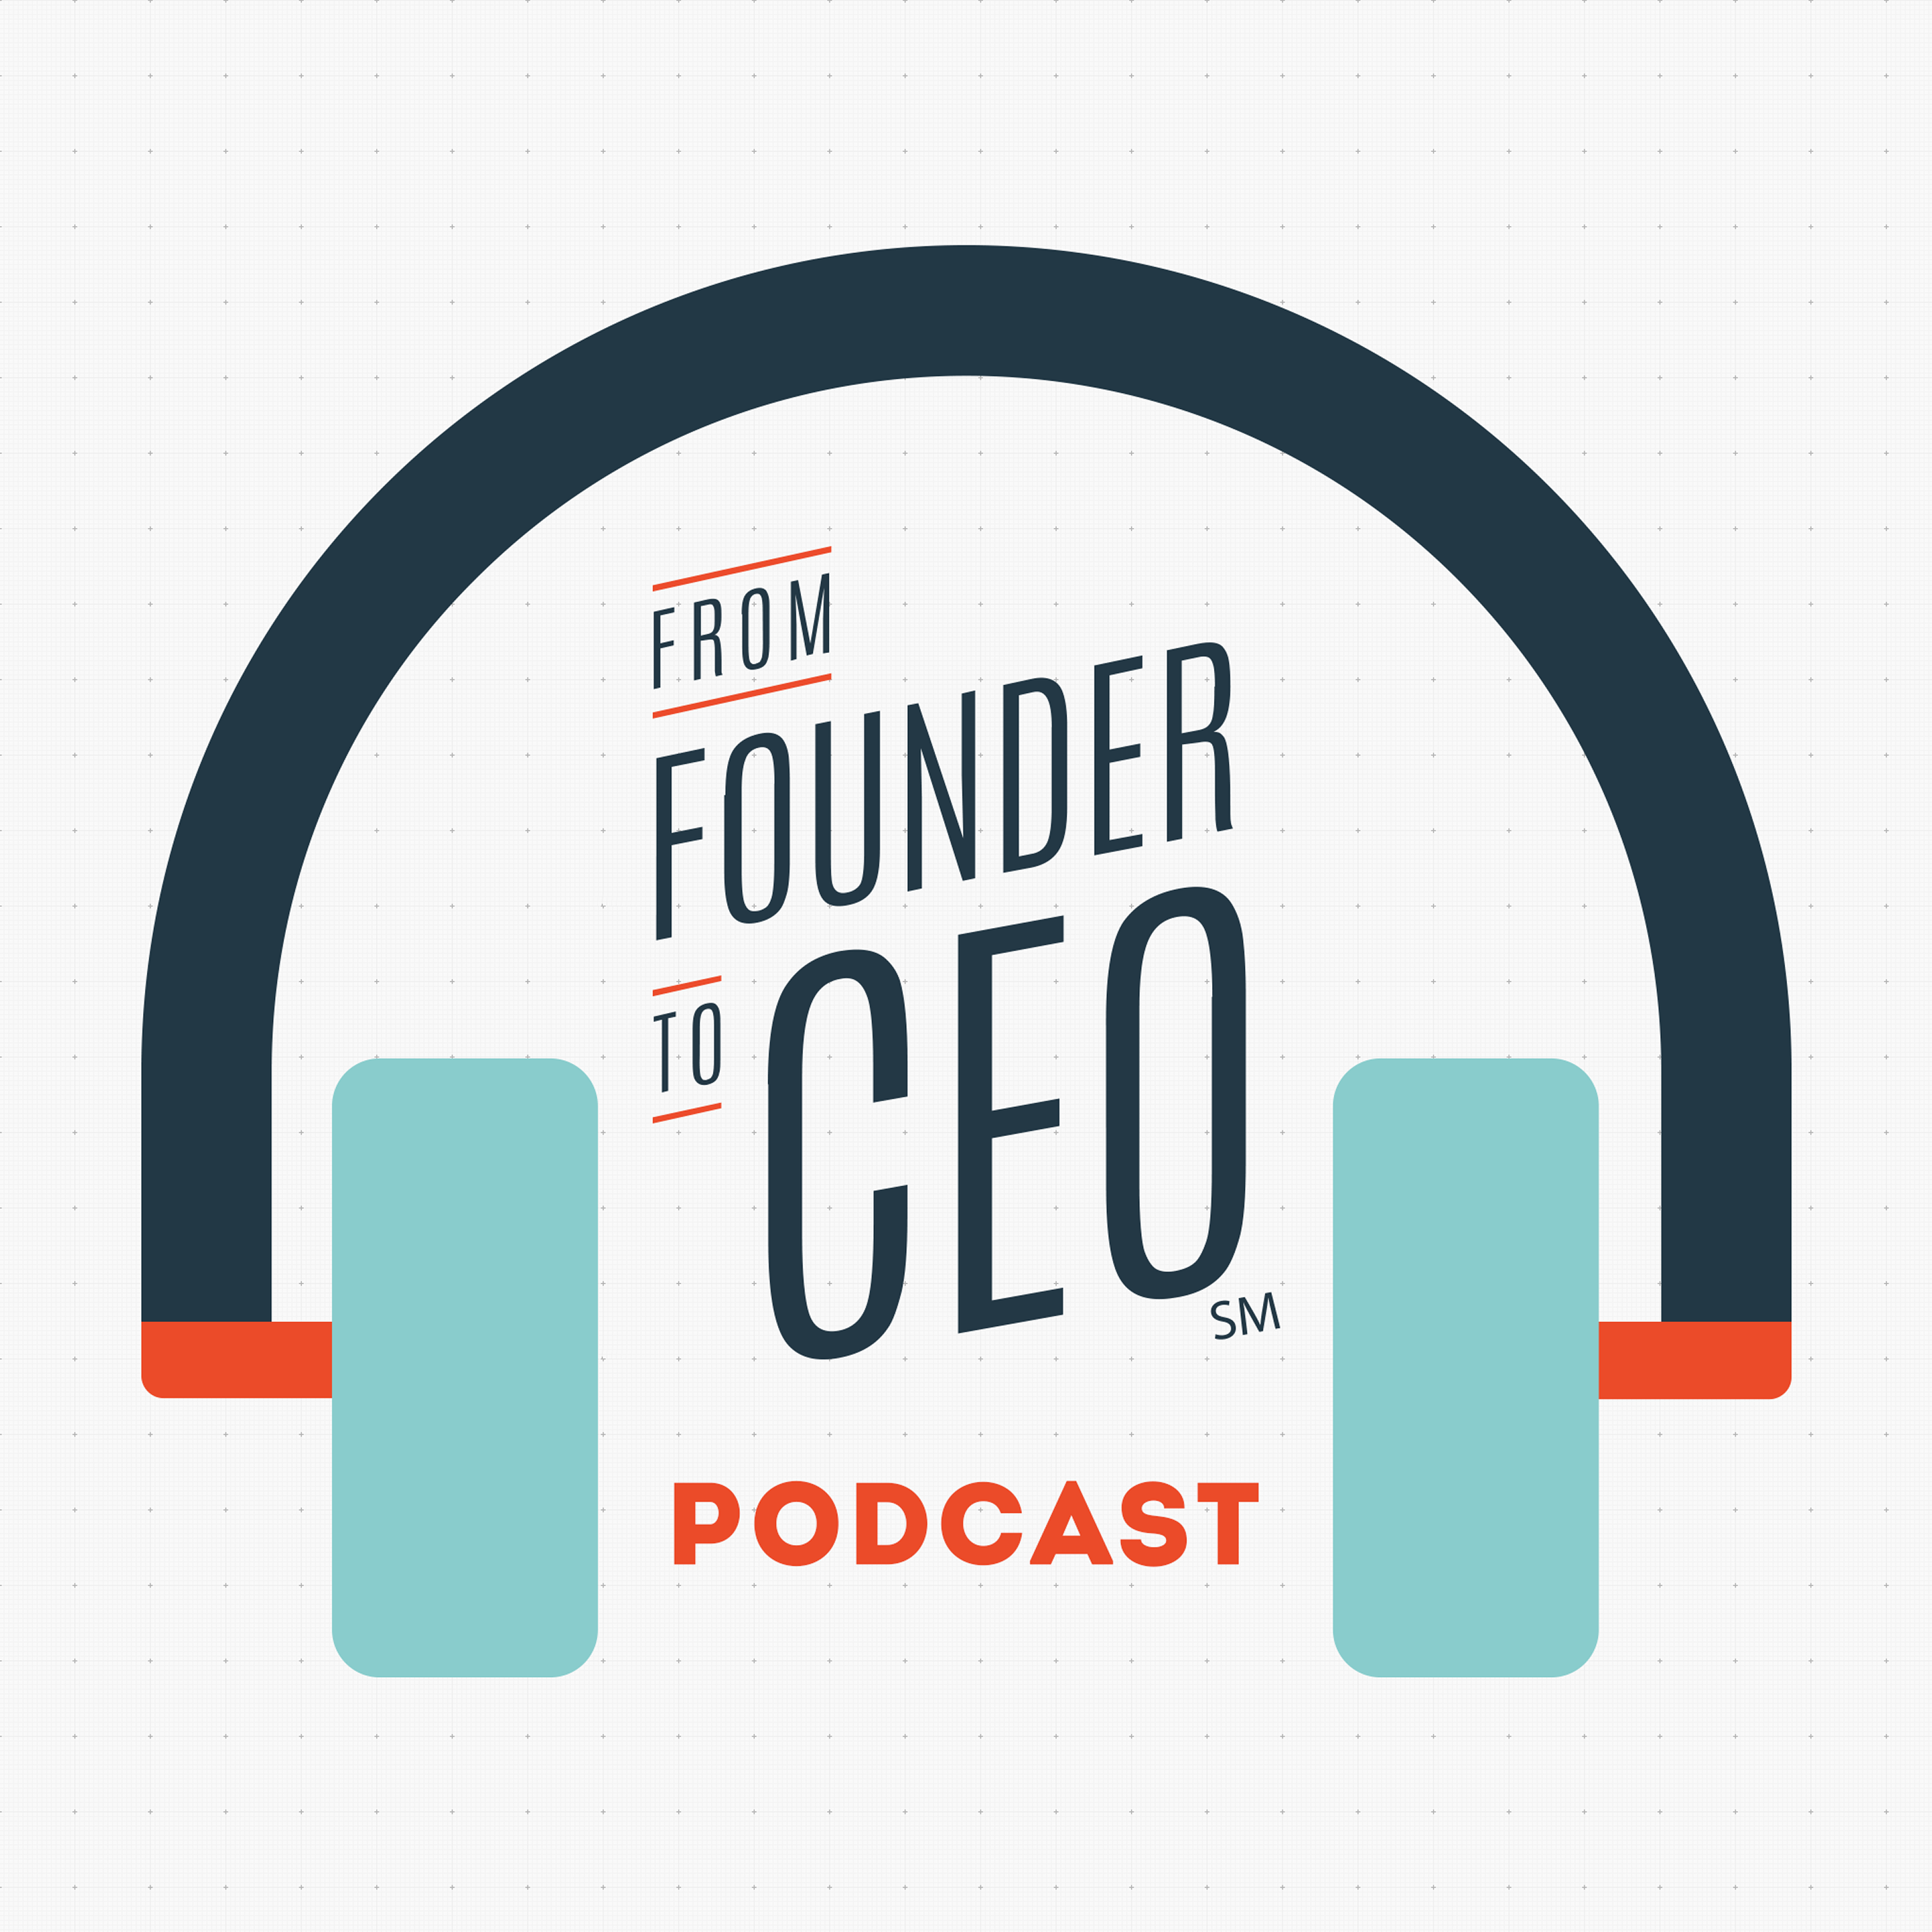 From Founder to CEO